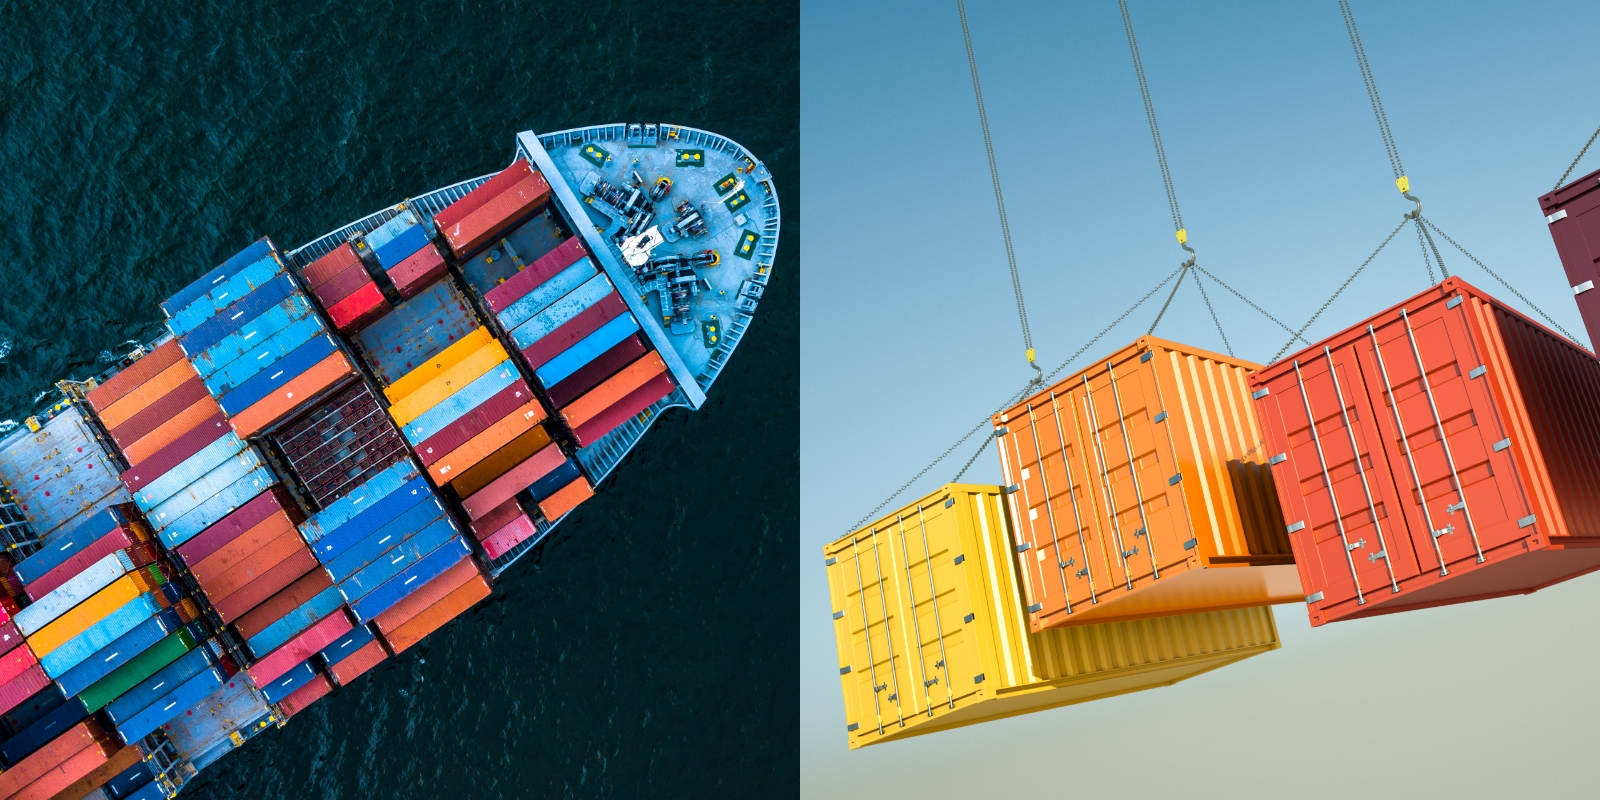 Second Forwarding & Container